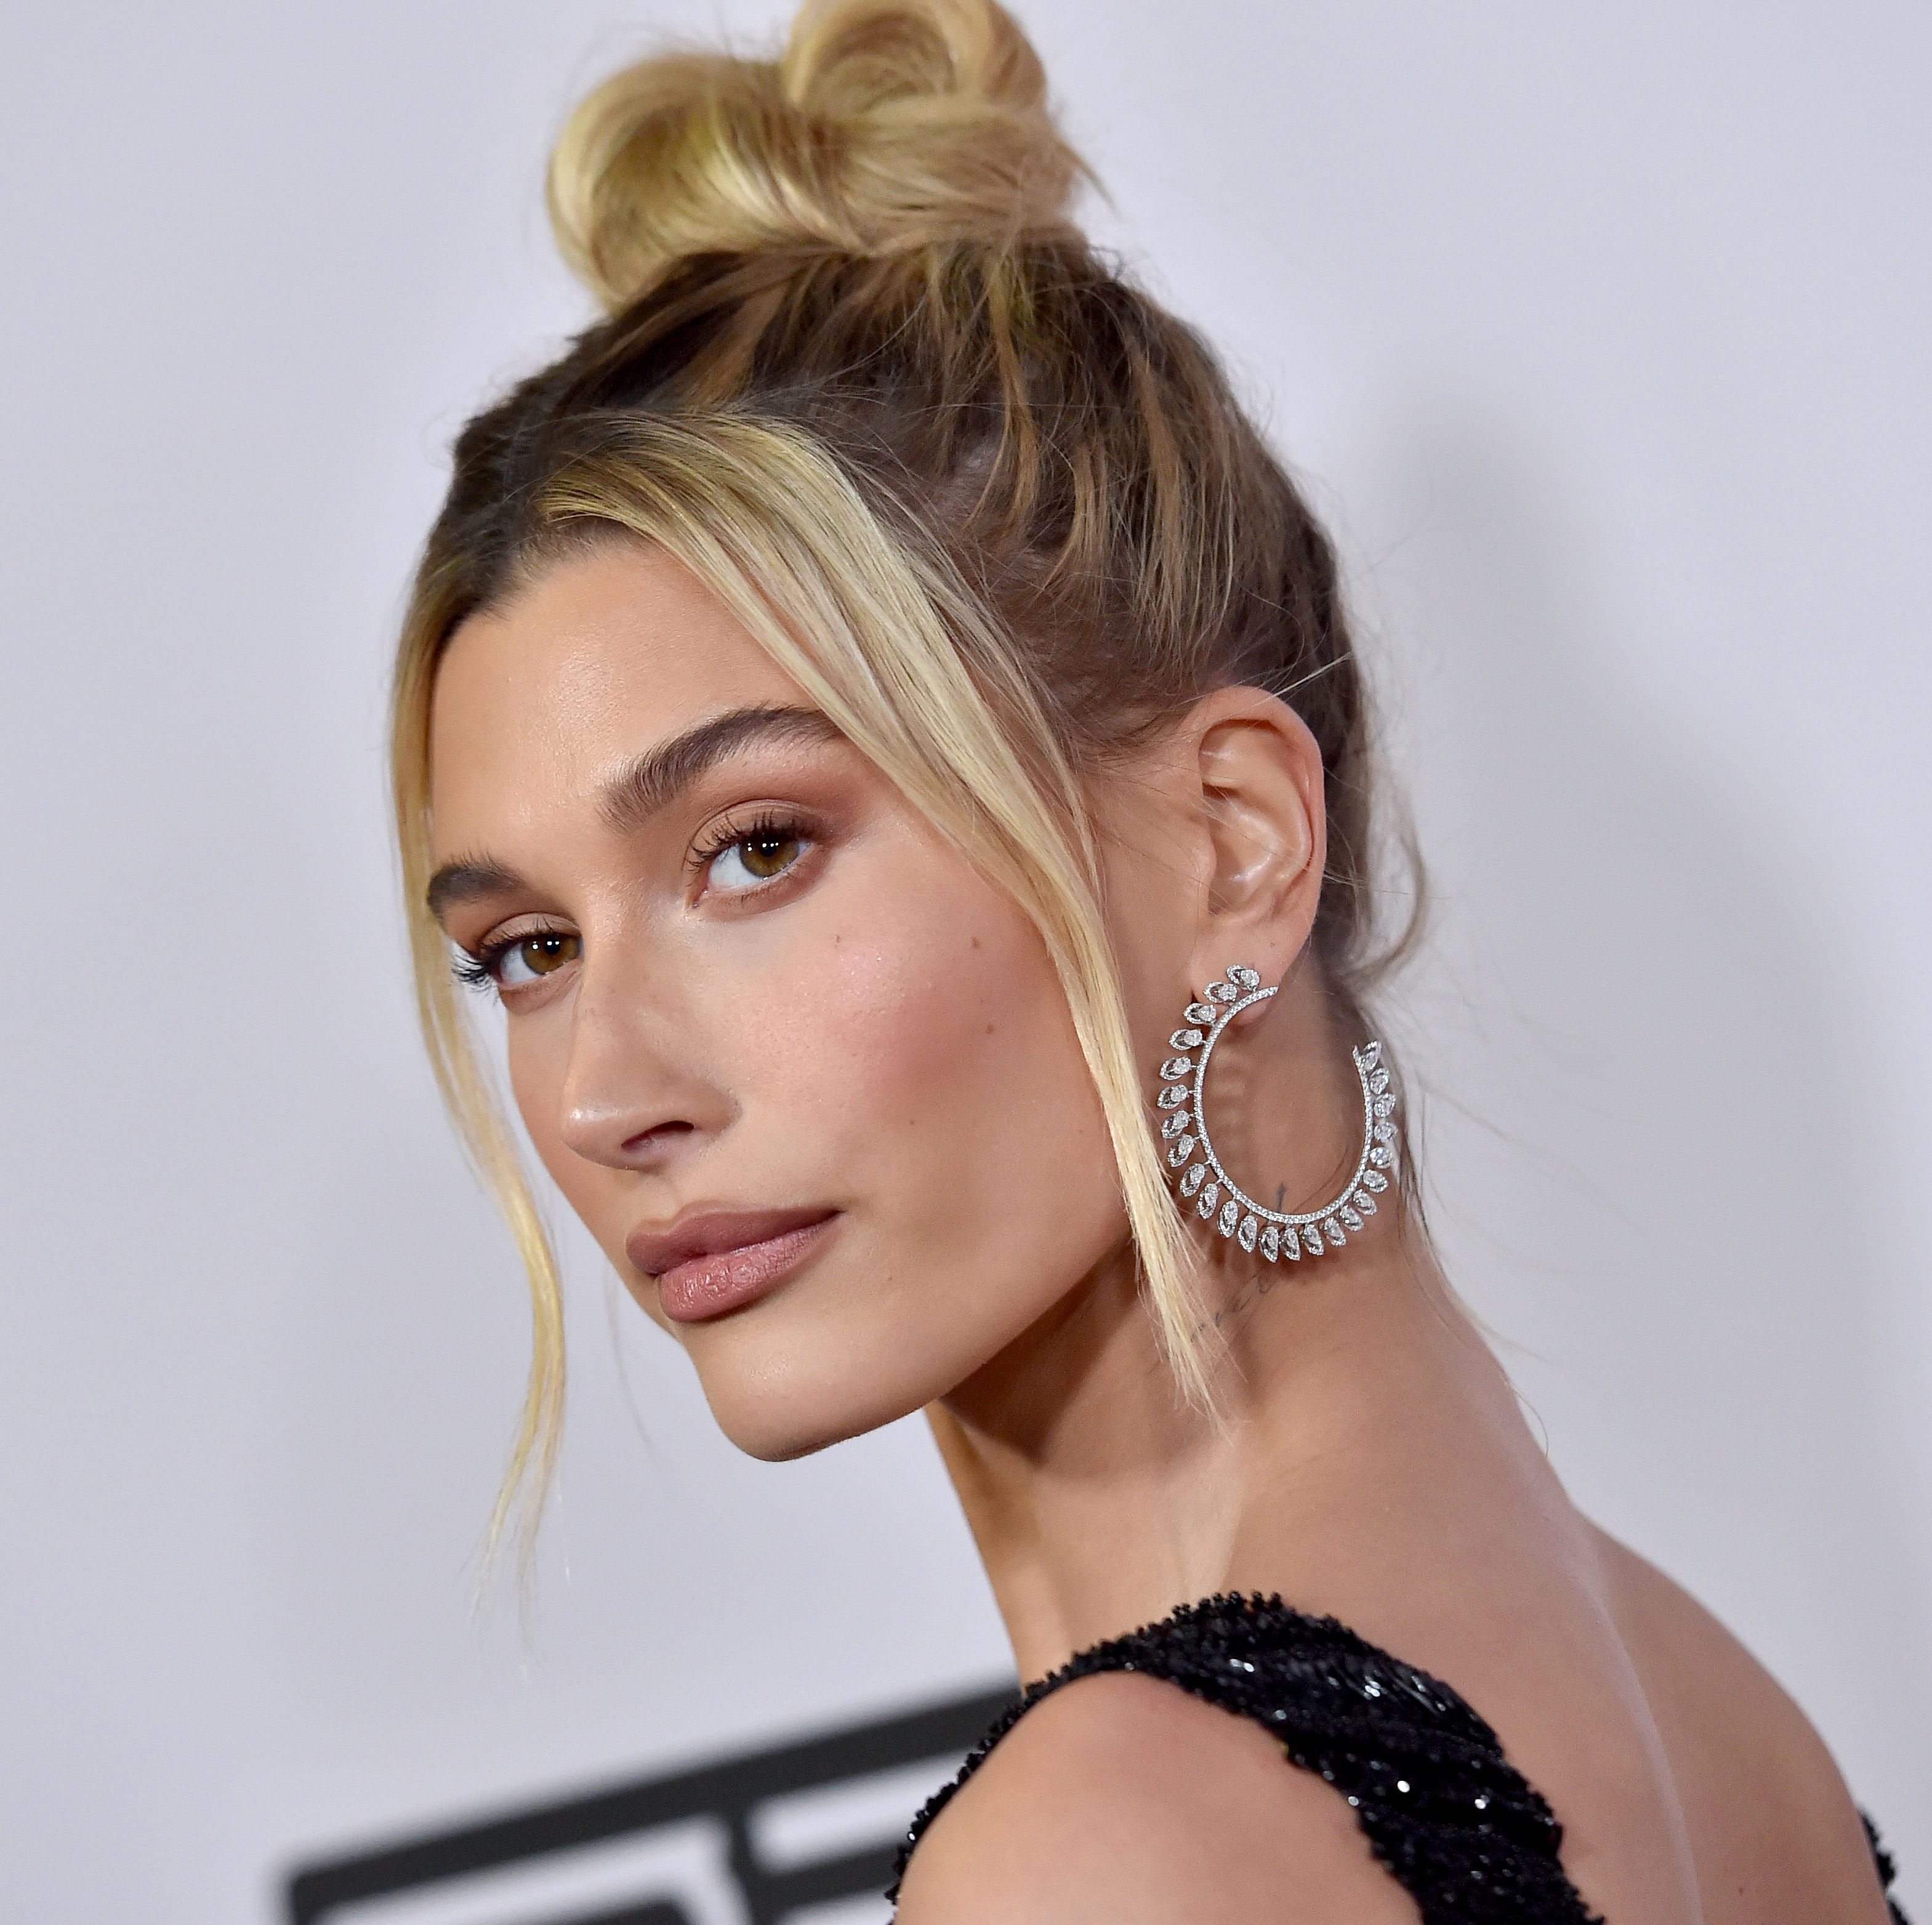 Hailey Bieber–Approved Clean Beauty Brand Kosas Is Having a Huge Sale This Weekend